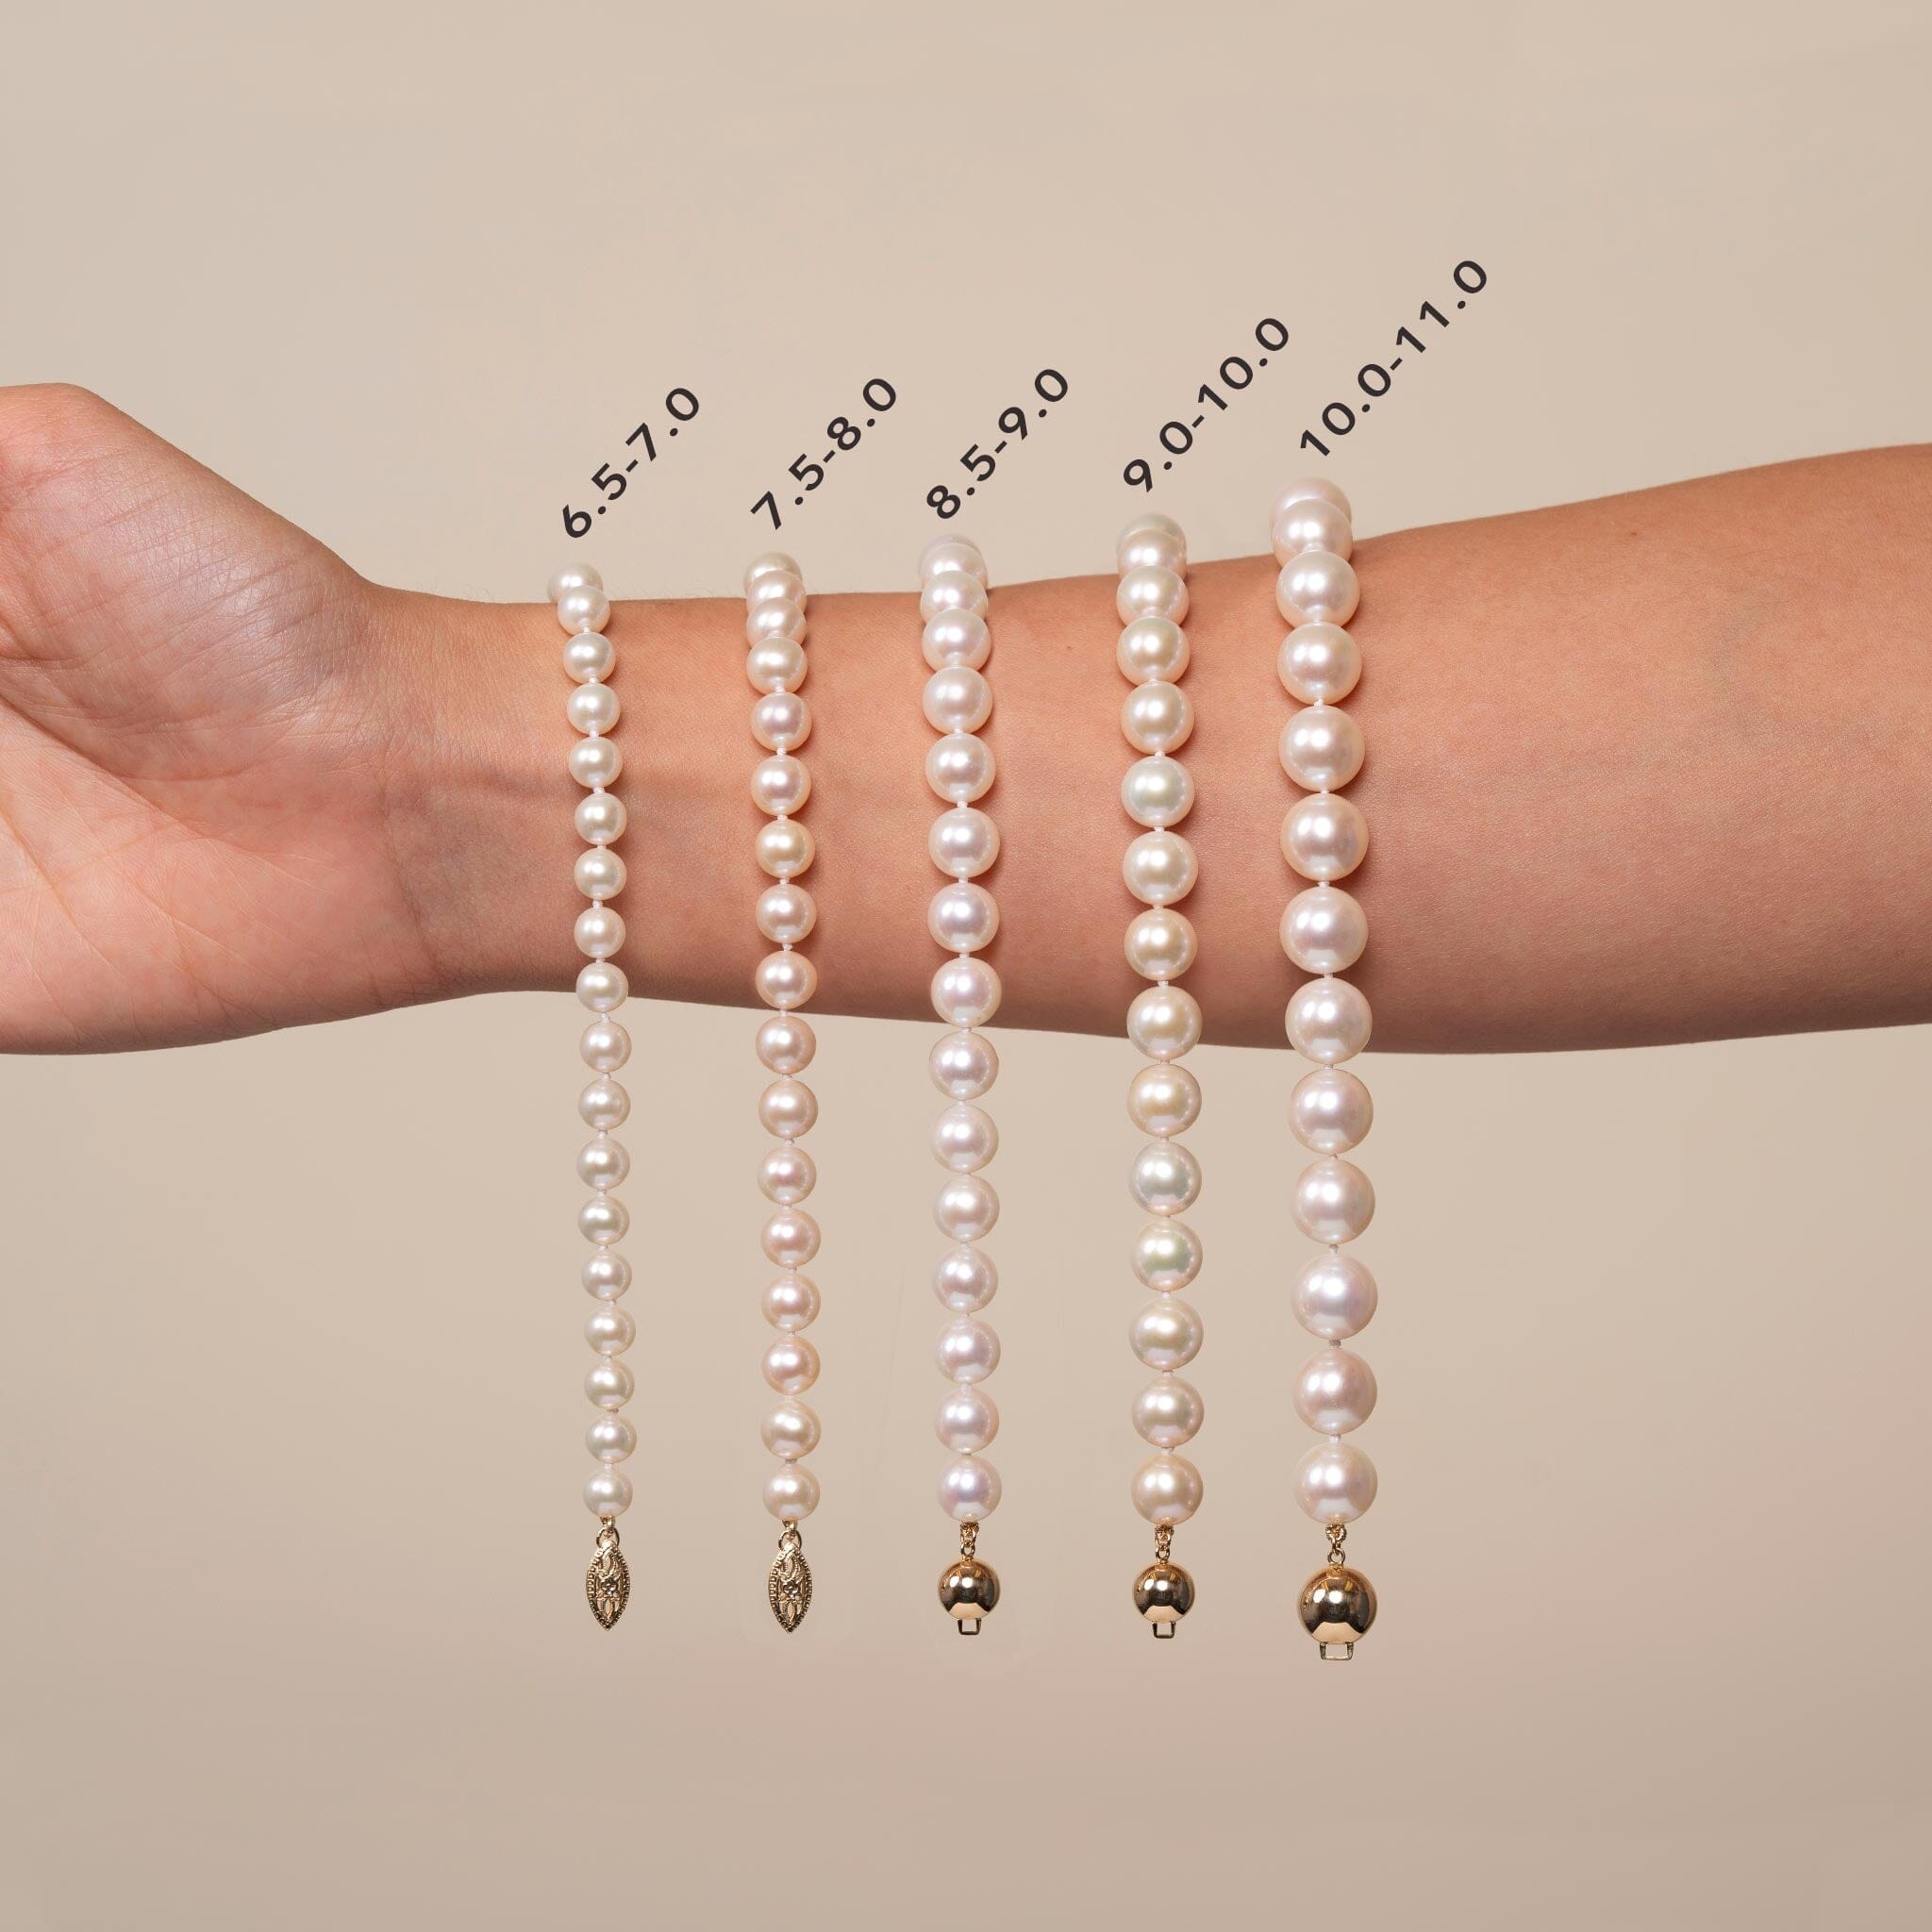 18 Inch 3 Piece Set of 7.5-8.0 mm AA+ White Freshwater Pearls